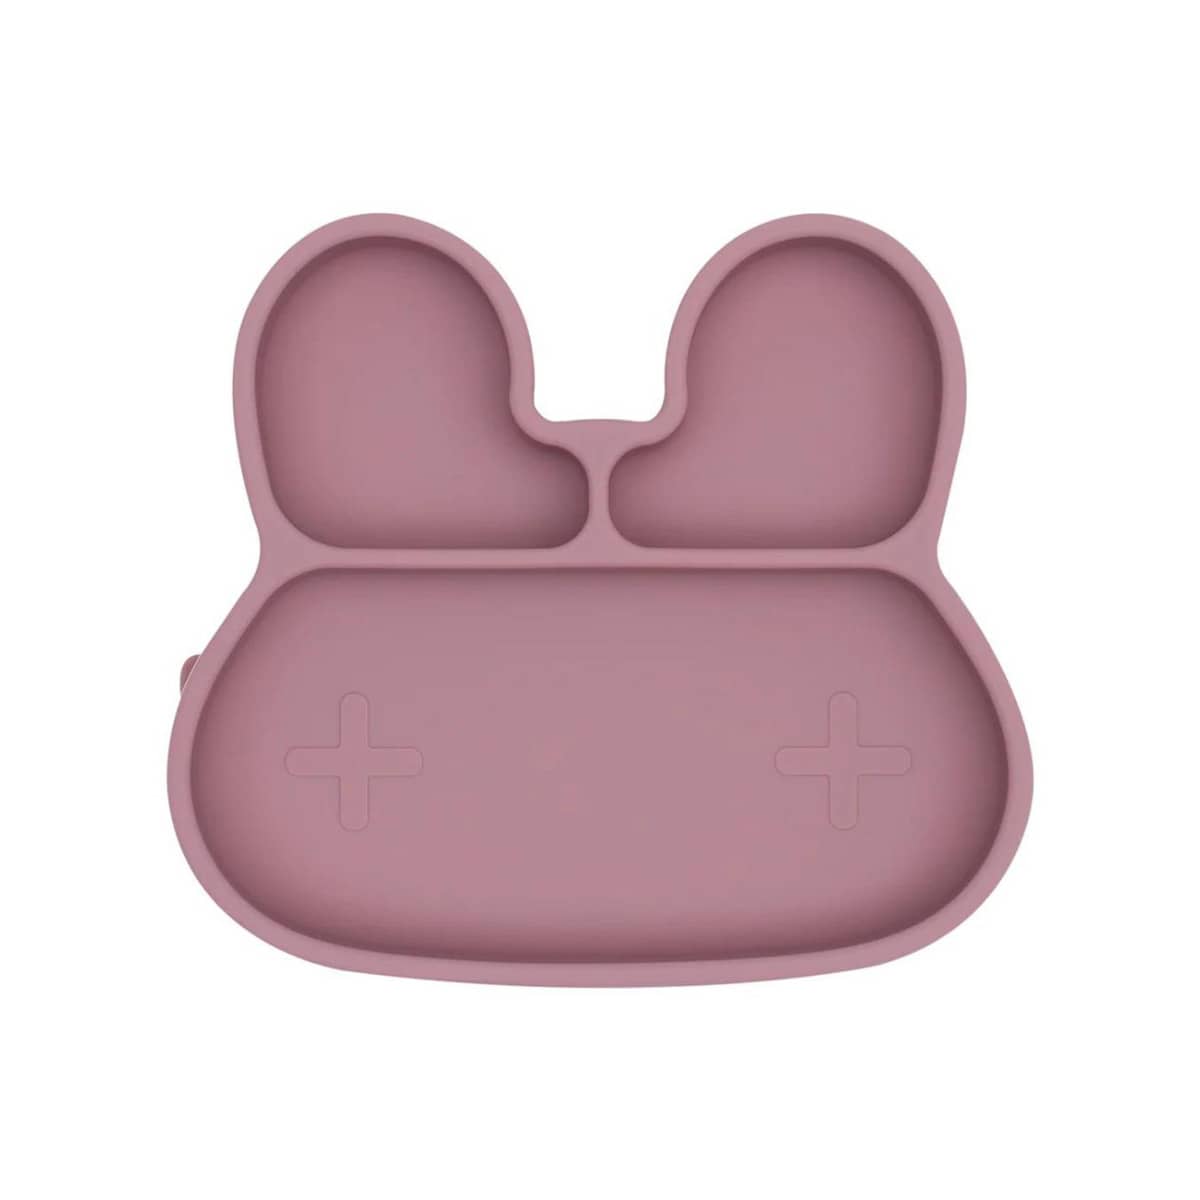 We Might Be Tiny Stickie Silicone Suction Plate - Bunny - Dusty Pink